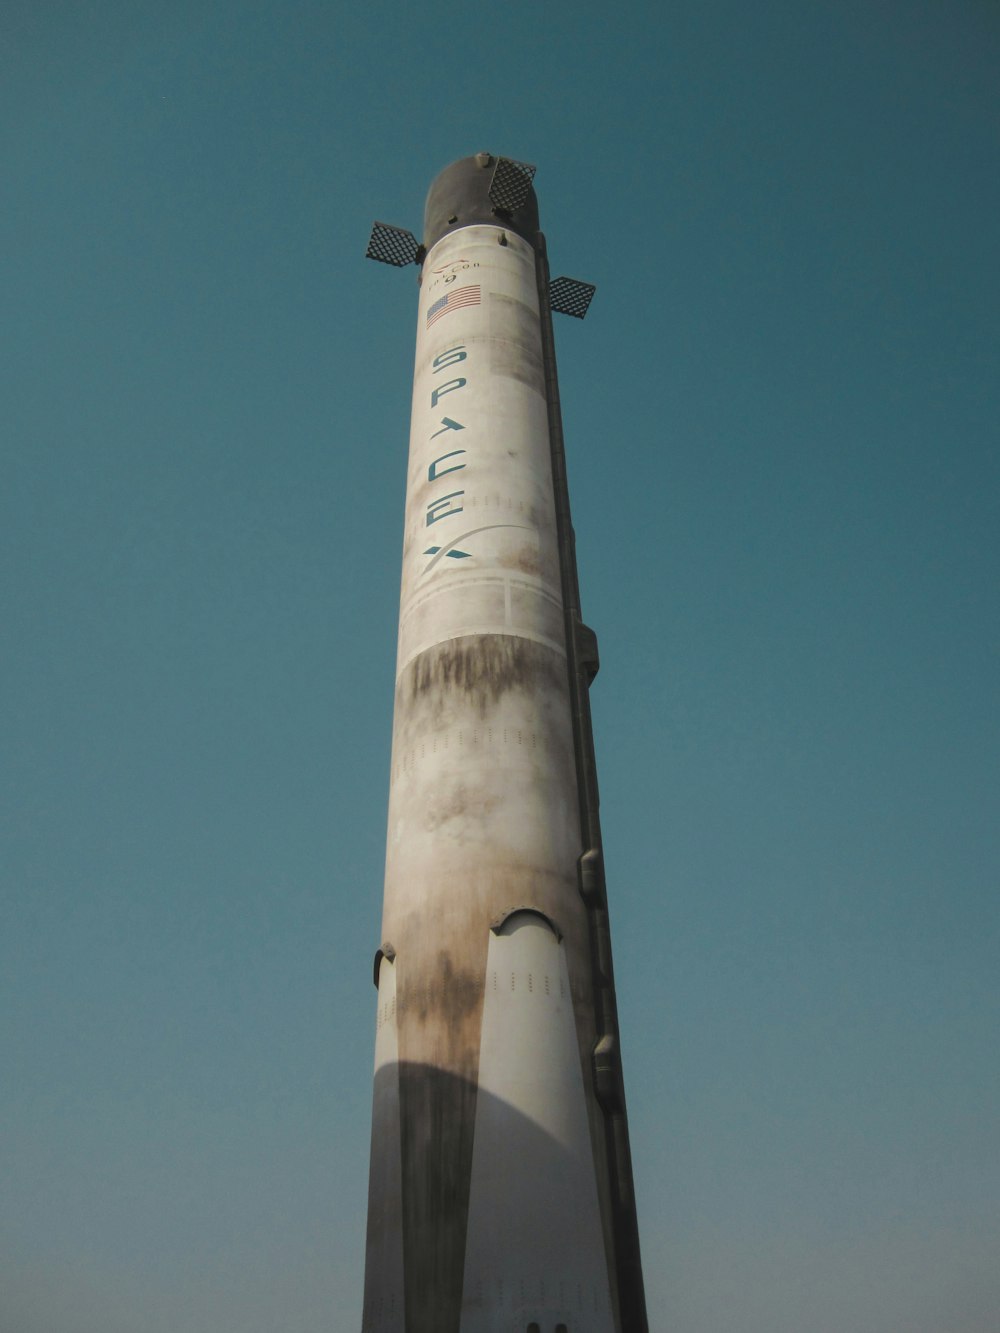 a very tall white rocket sitting on top of a field